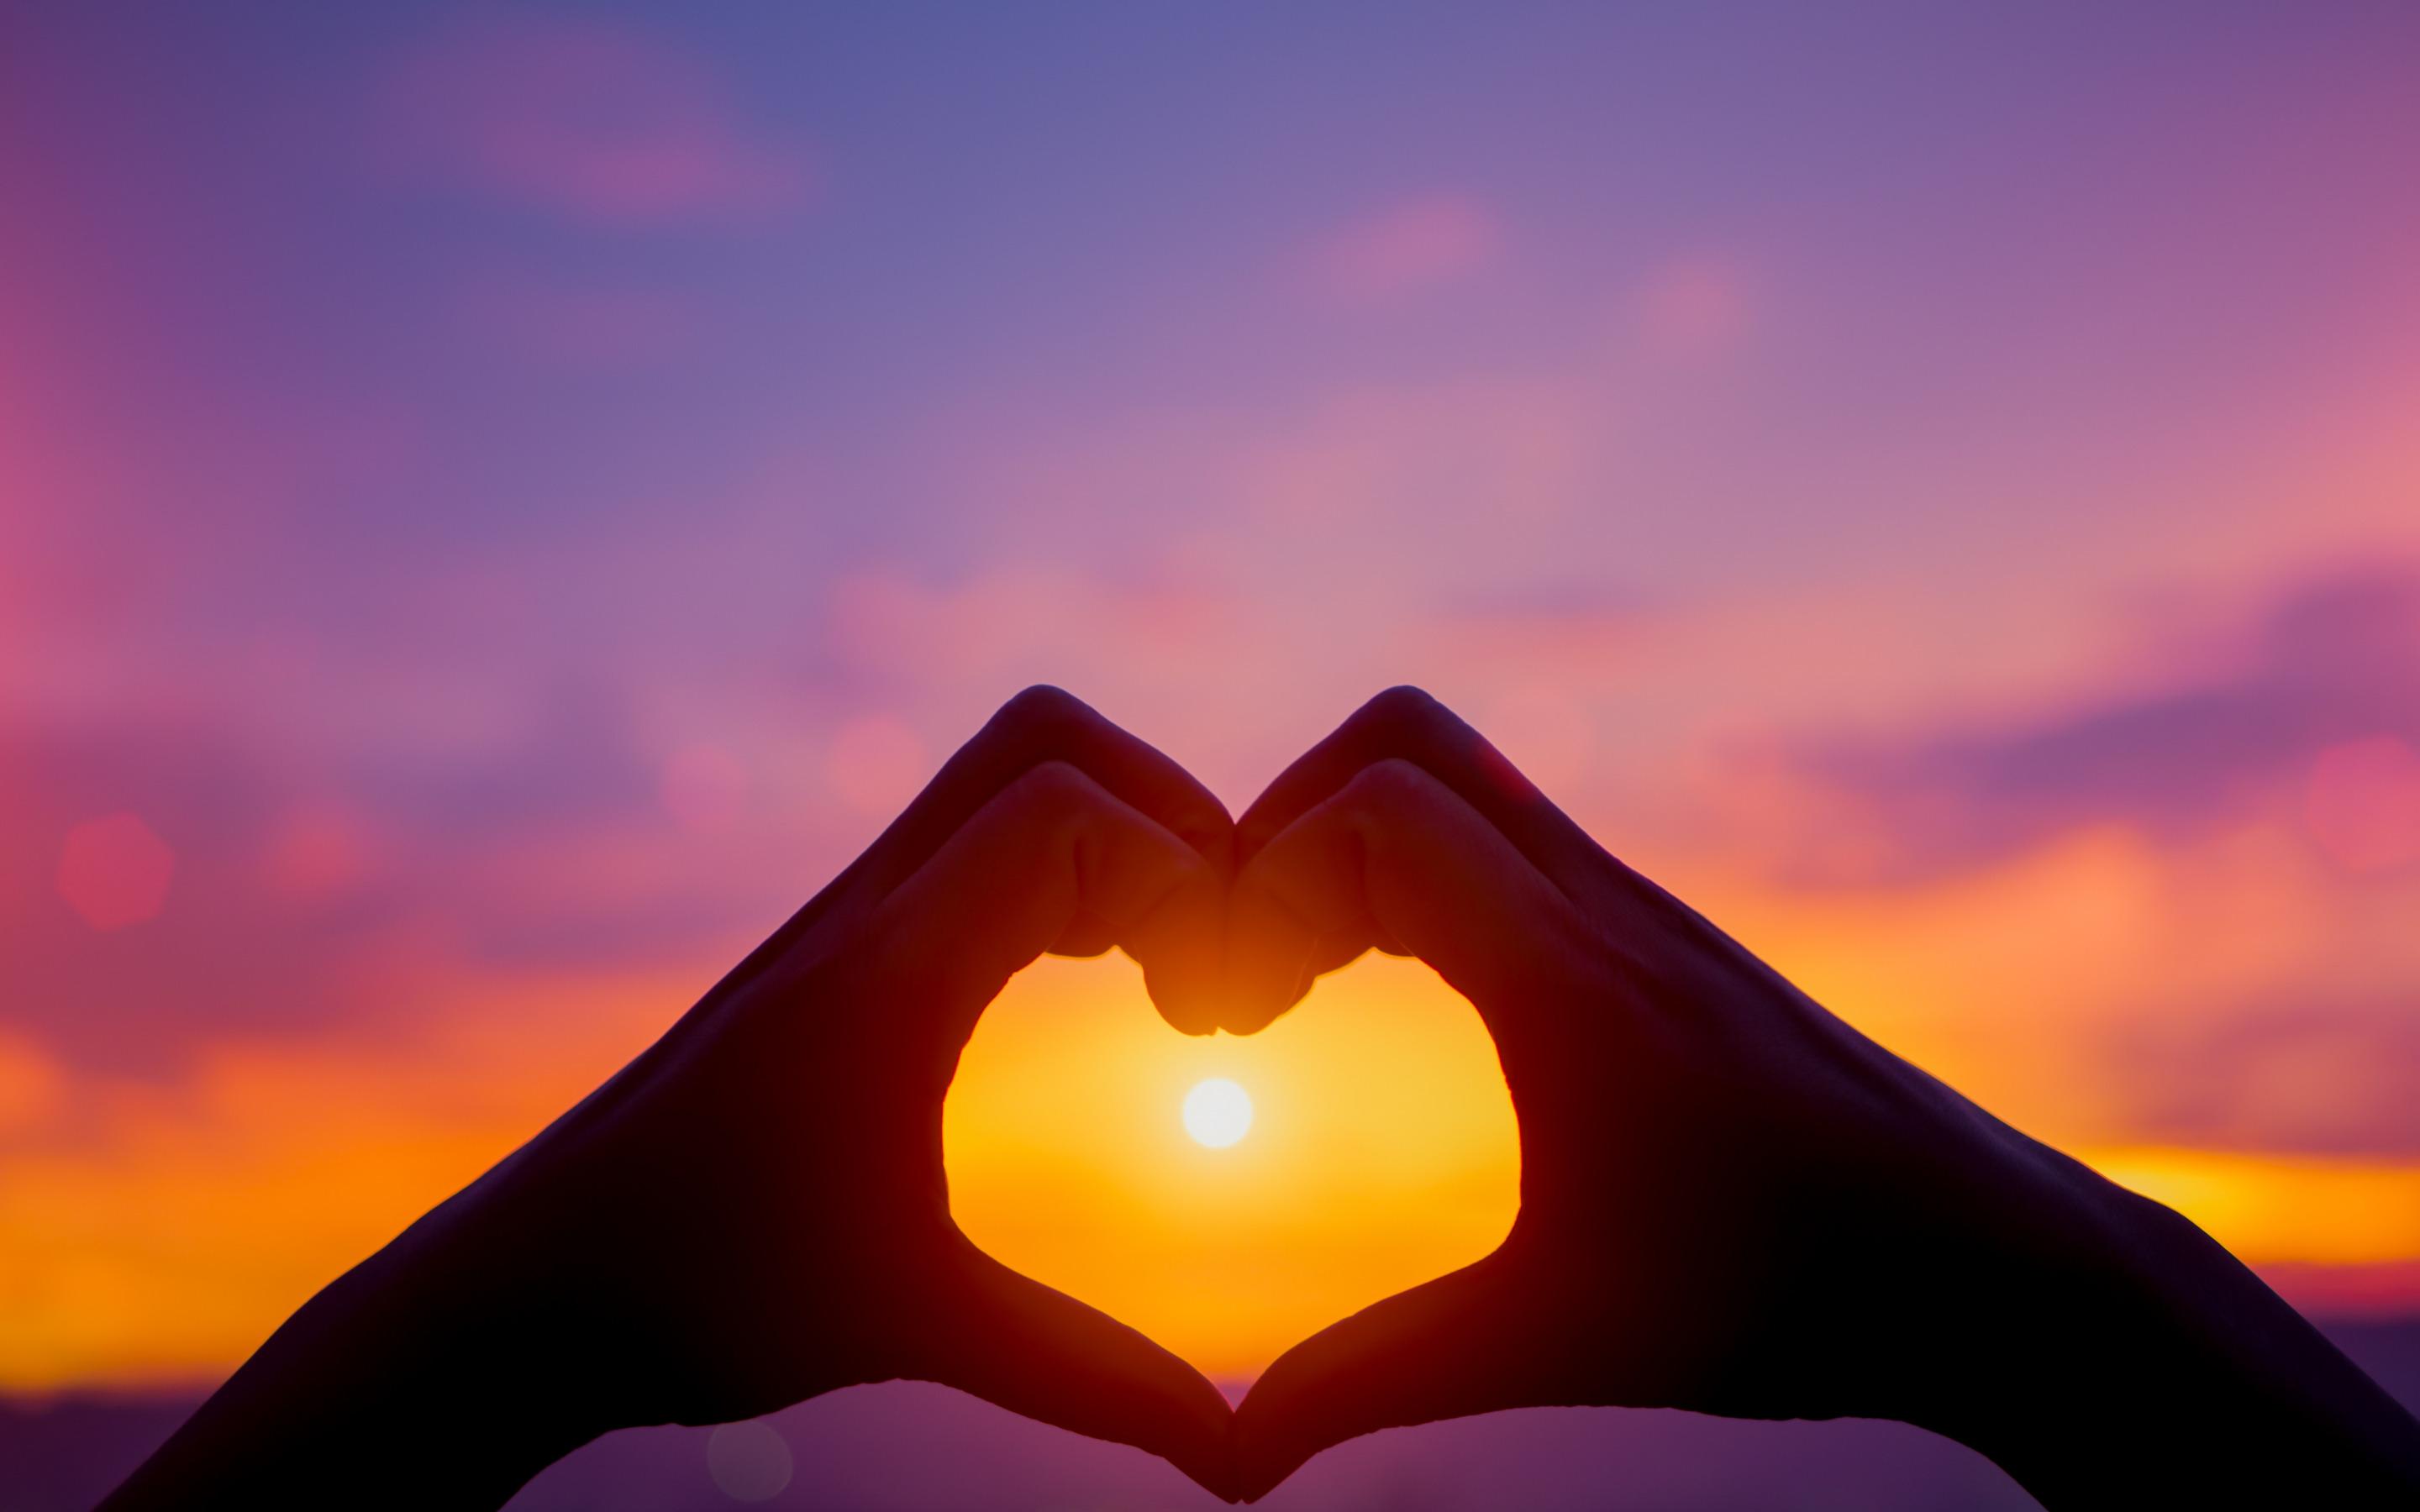 Download wallpaper sign of the heart by hands, sunset, evening, sun in hand, heart, romance for desktop with resolution 2880x1800. High Quality HD picture wallpaper